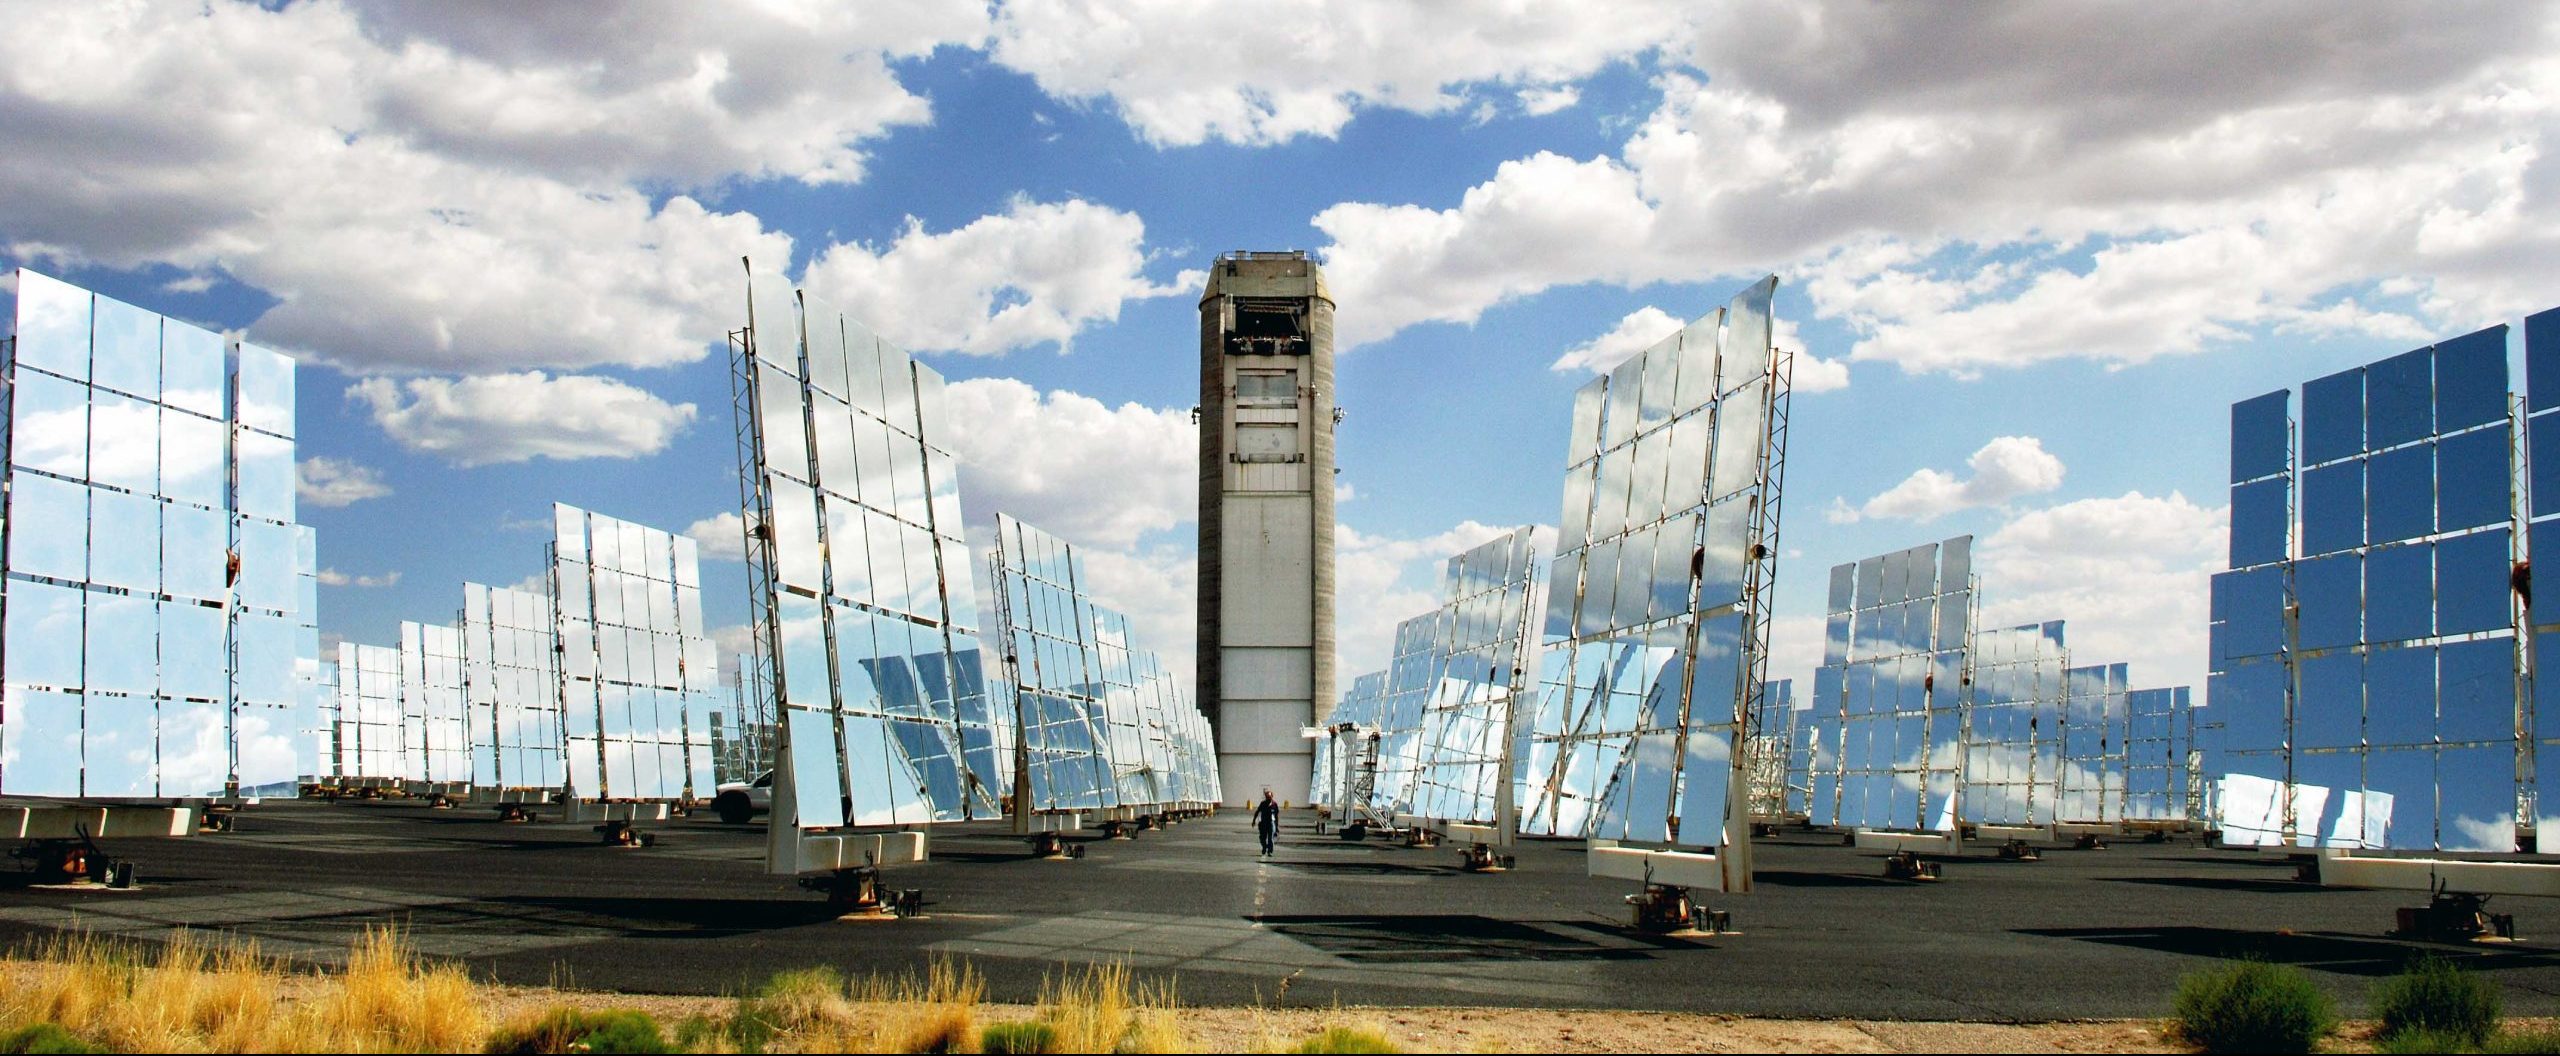 Concentrating solar power tower at the National Solar Thermal Test Facility (NSTTF)